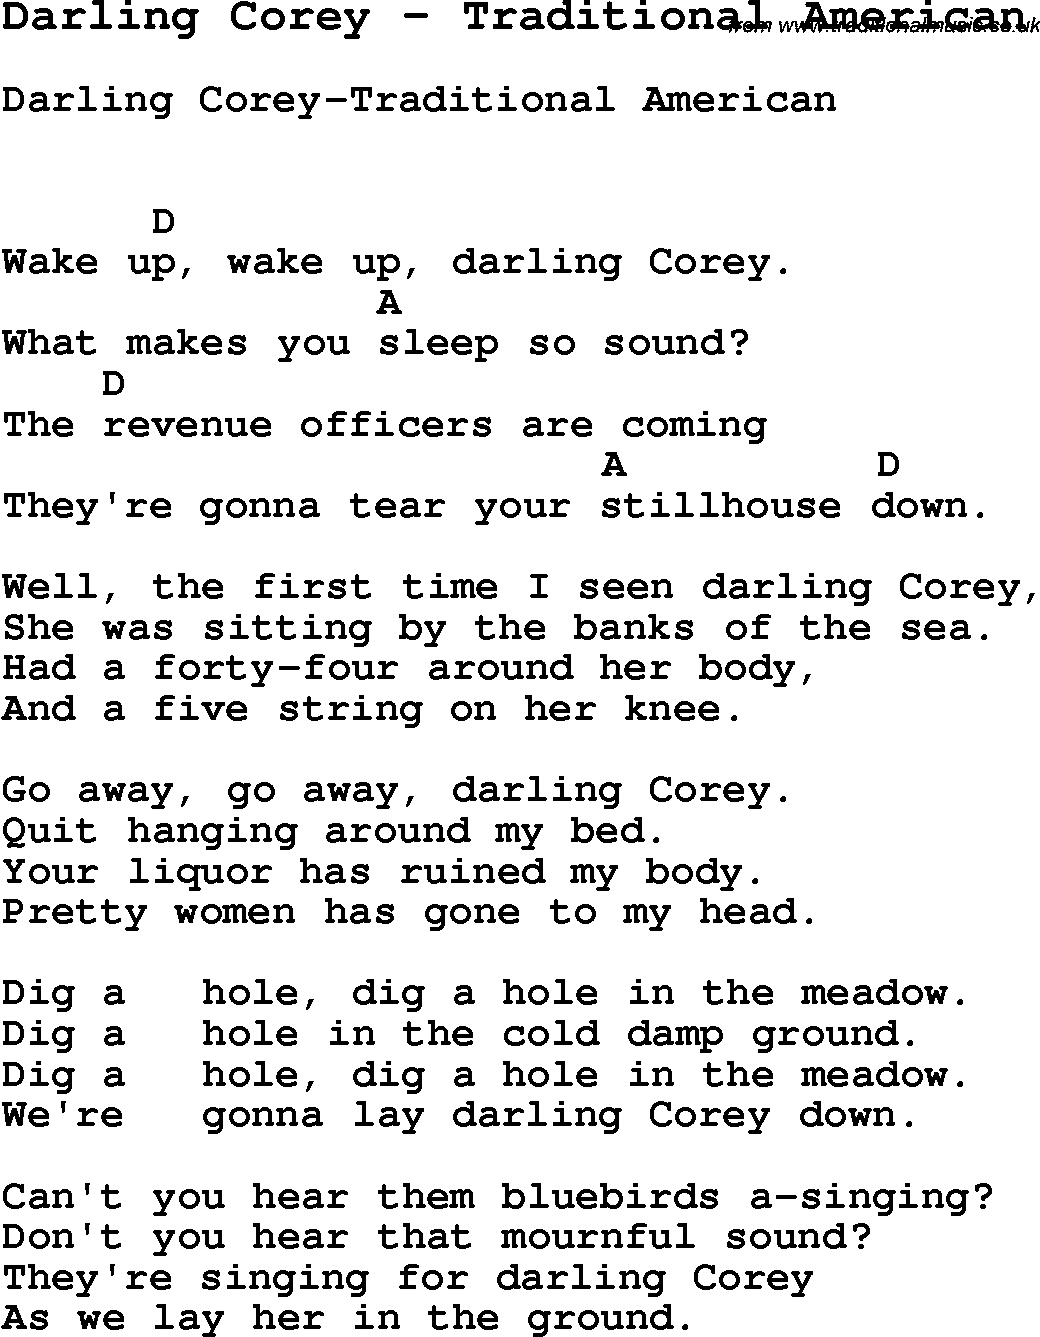 Song Darling Corey by Traditional American, with lyrics for vocal performance and accompaniment chords for Ukulele, Guitar Banjo etc.